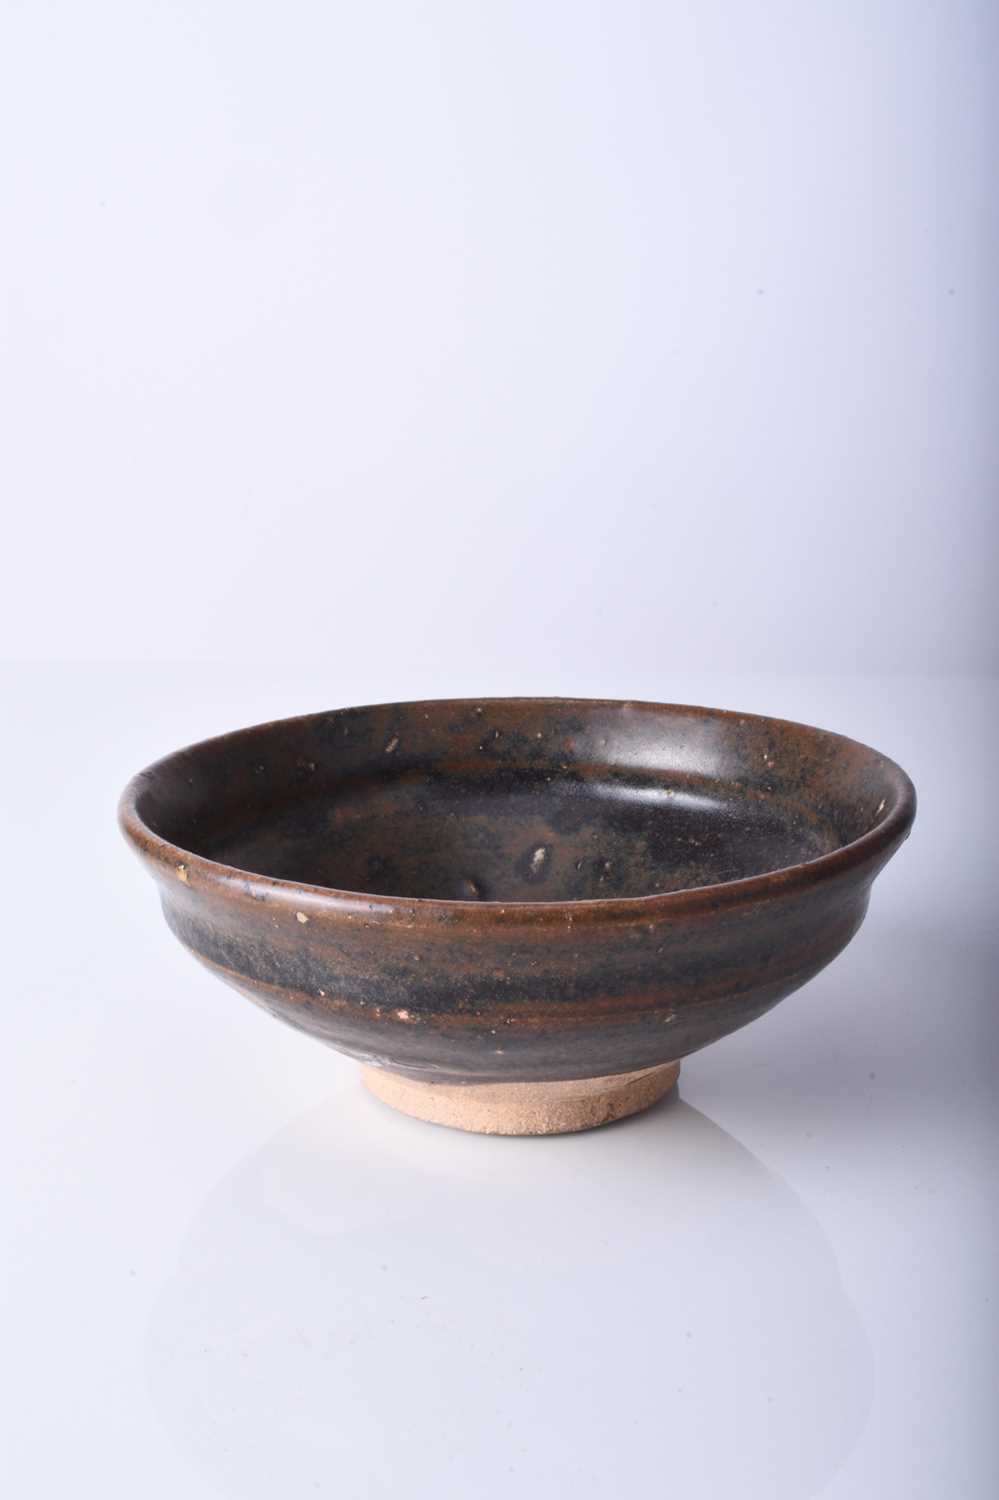 A Chinese Jian ware bowl, possibly Song Dynasty - Image 2 of 5